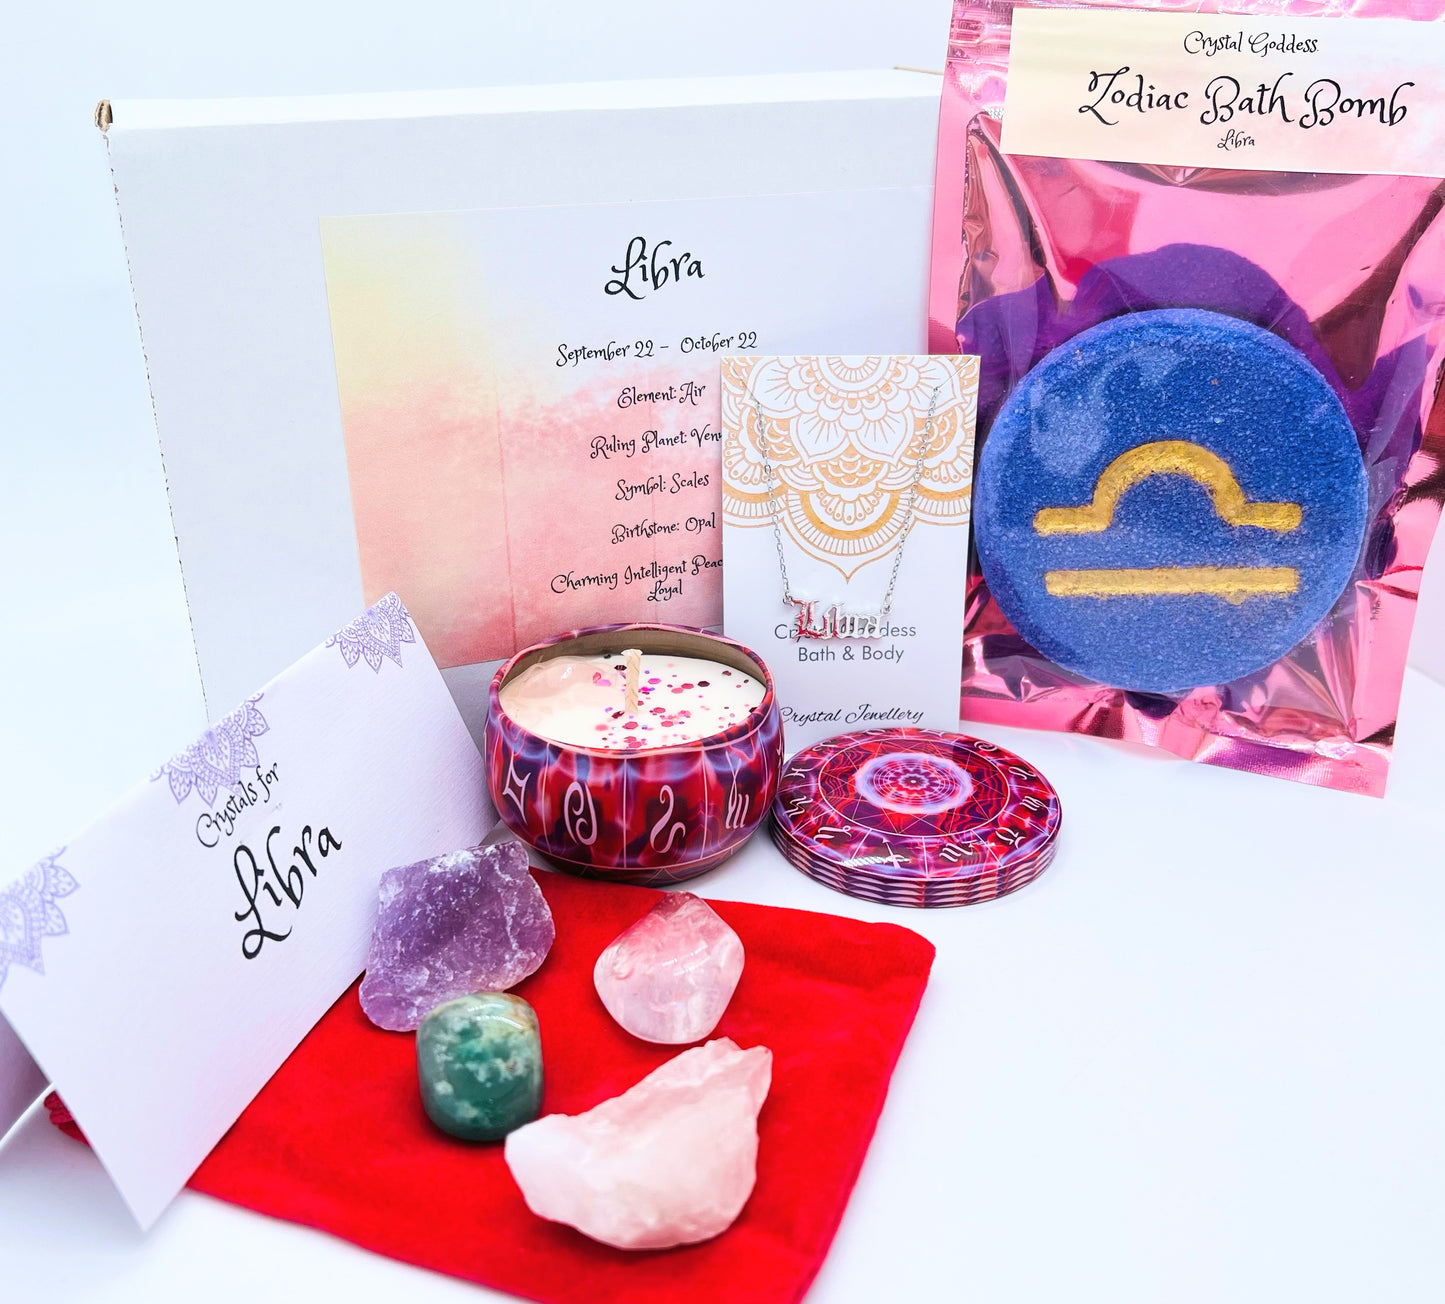 Libra zodiac gift box showing a set of four crystals, crystal candle, pendant and a bath bomb with the symbol for this sign on it.